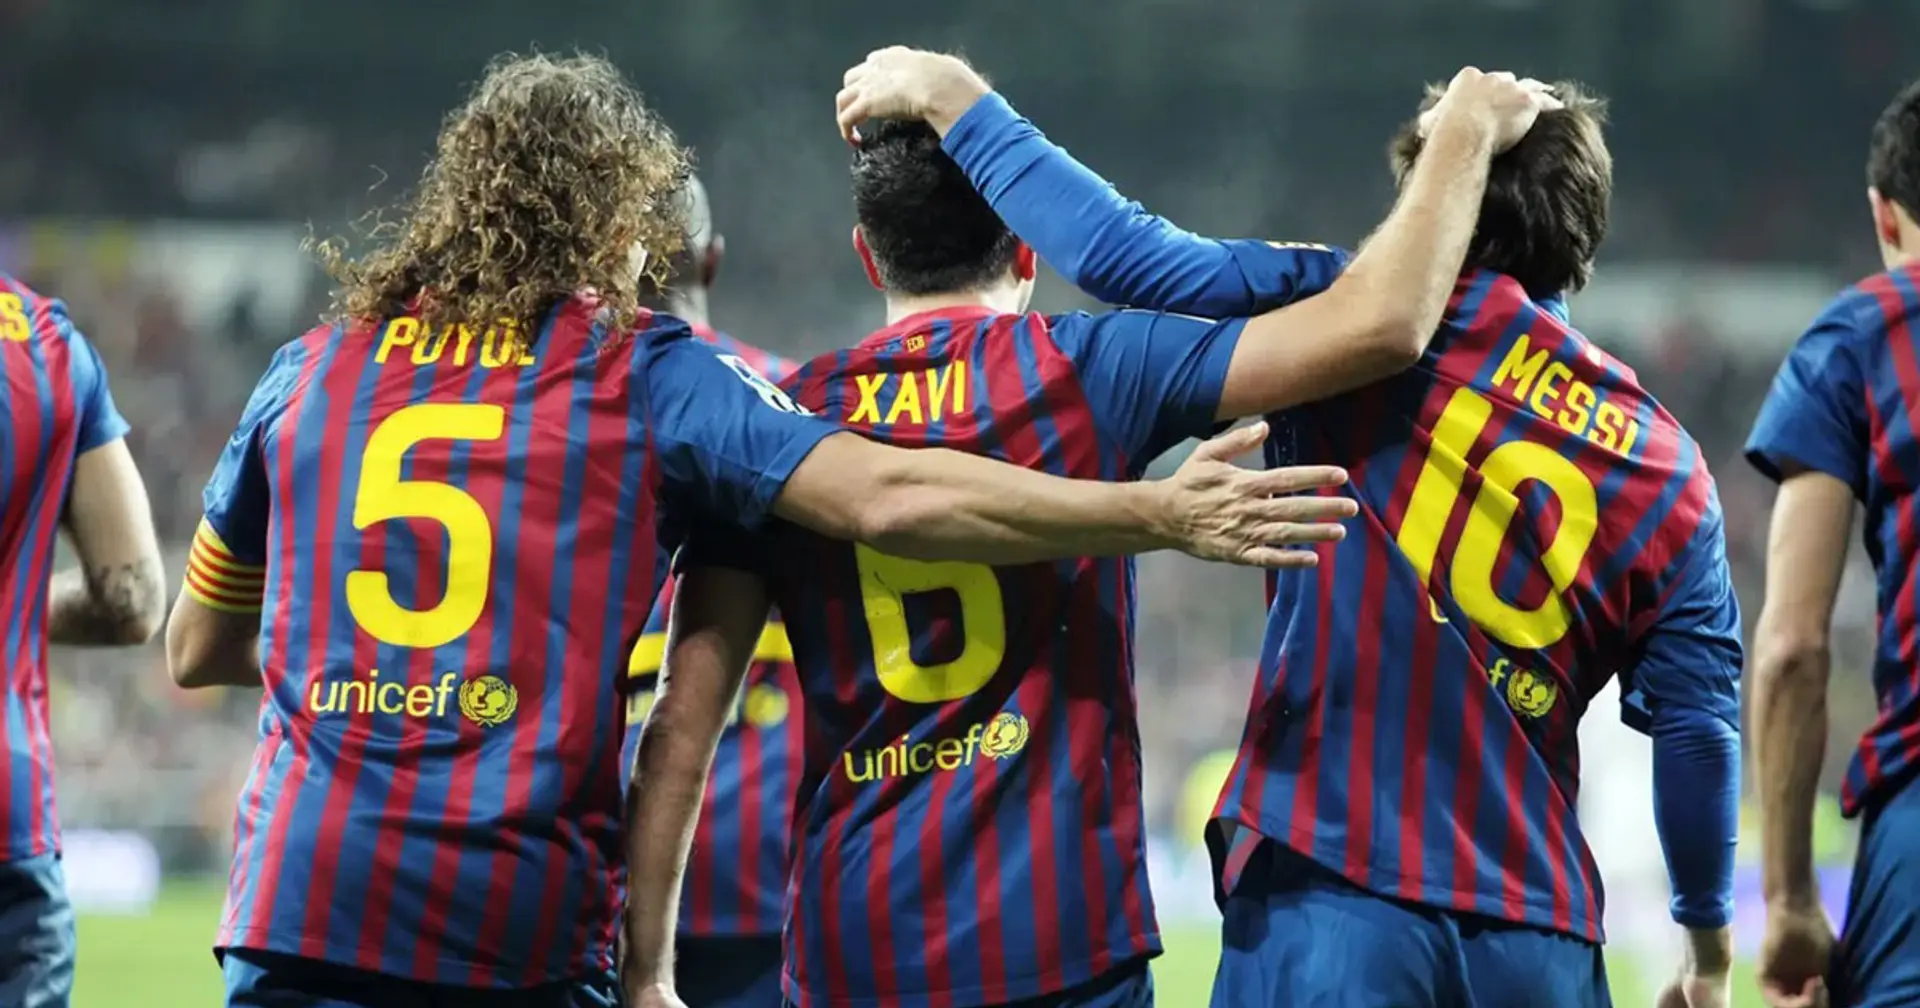 'We were club of cerebral and instinctive players': Tribuna names best comment of the week in global Barca community